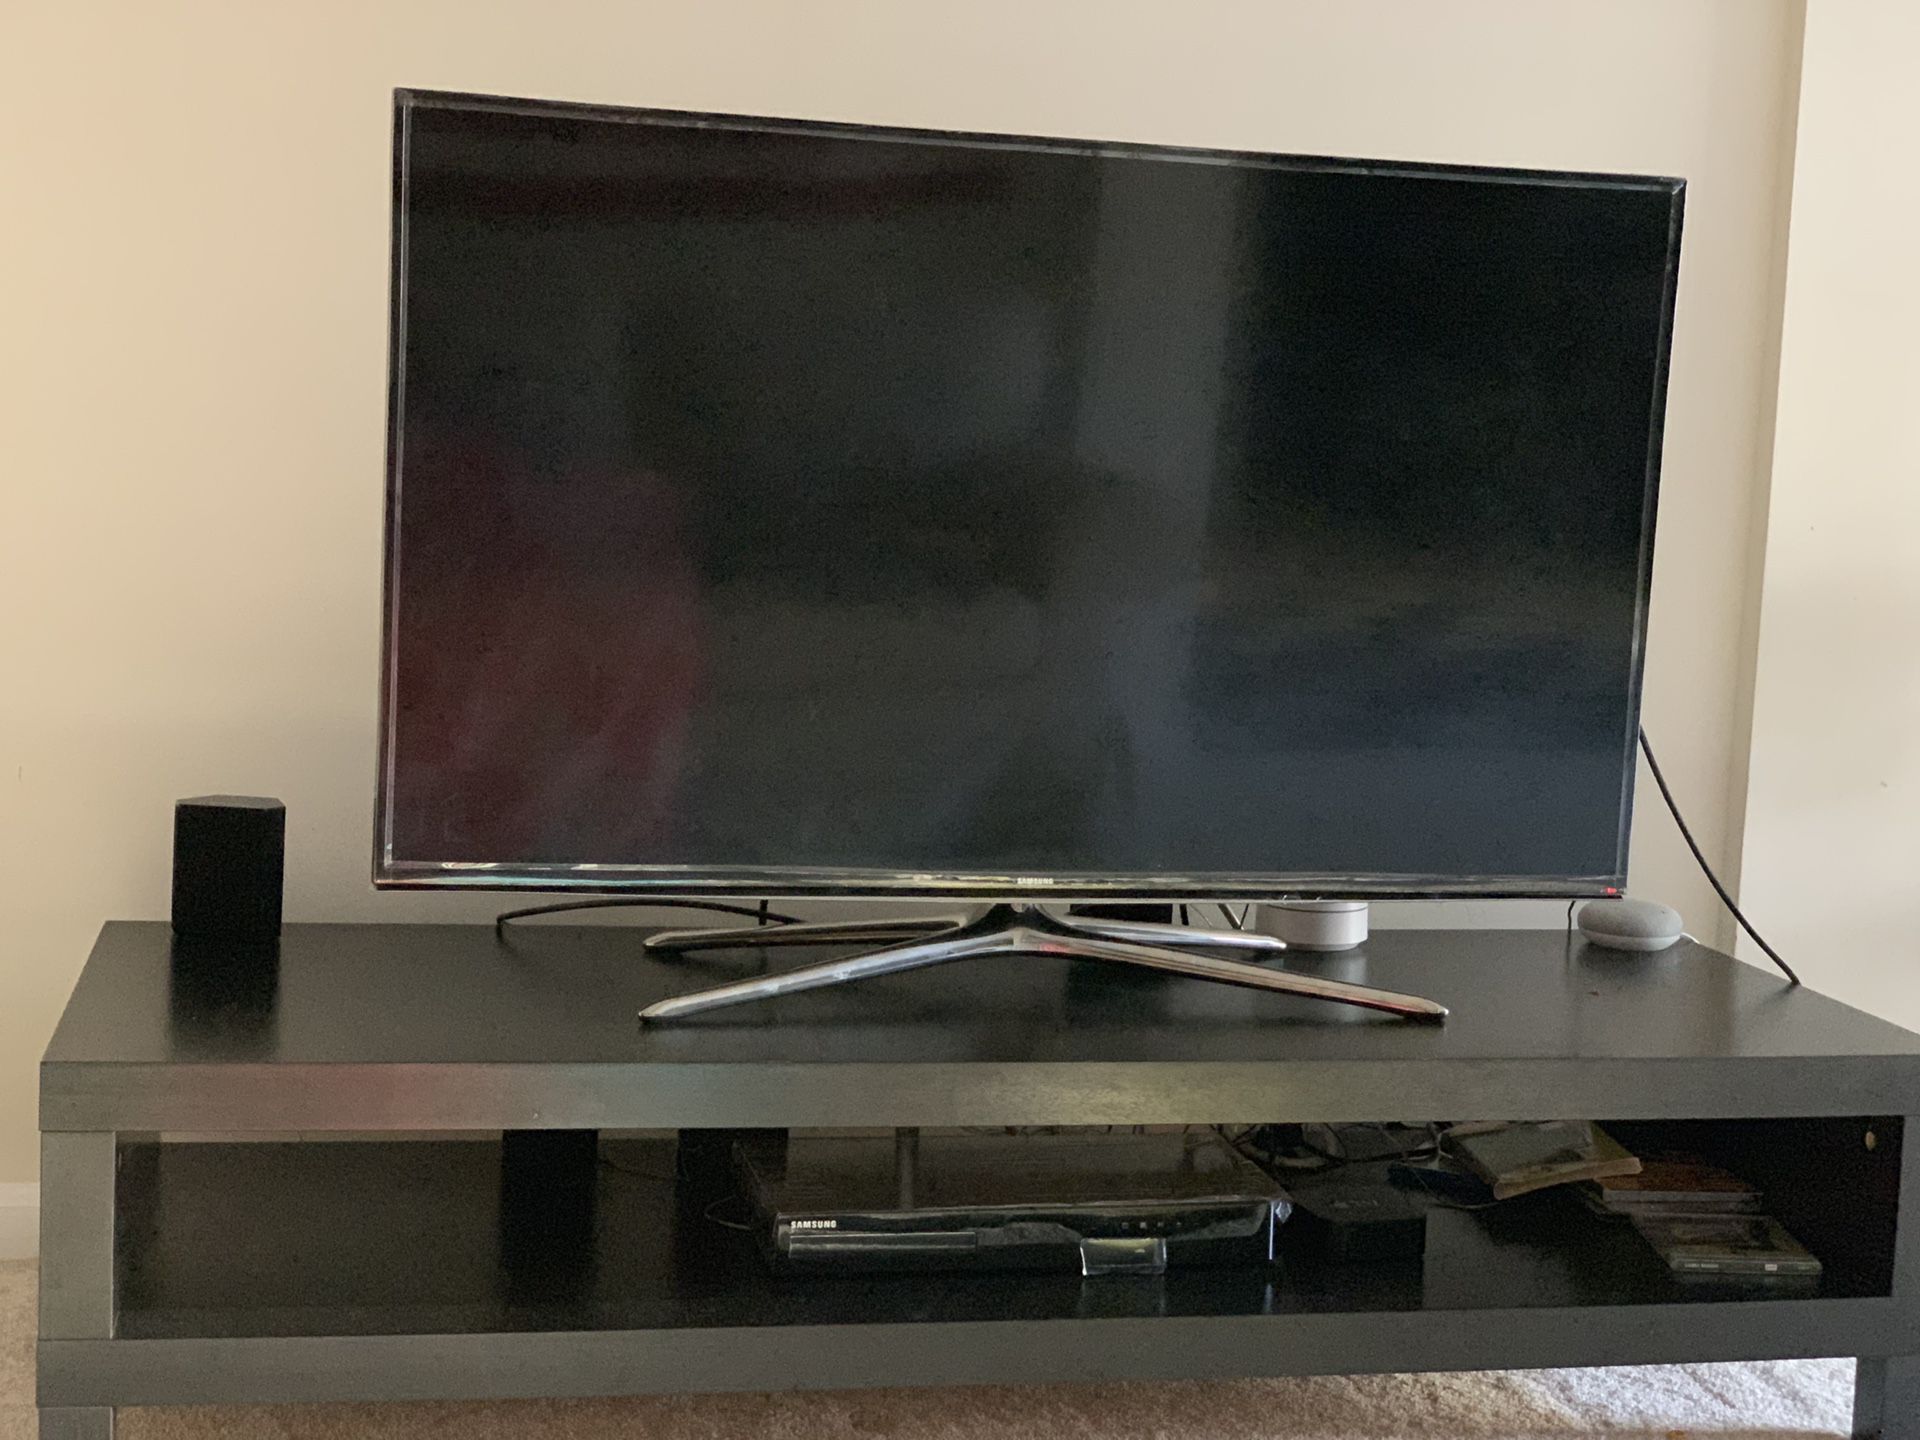 Samsung 48" TV, Samsung home theater with speakers and TV Stand